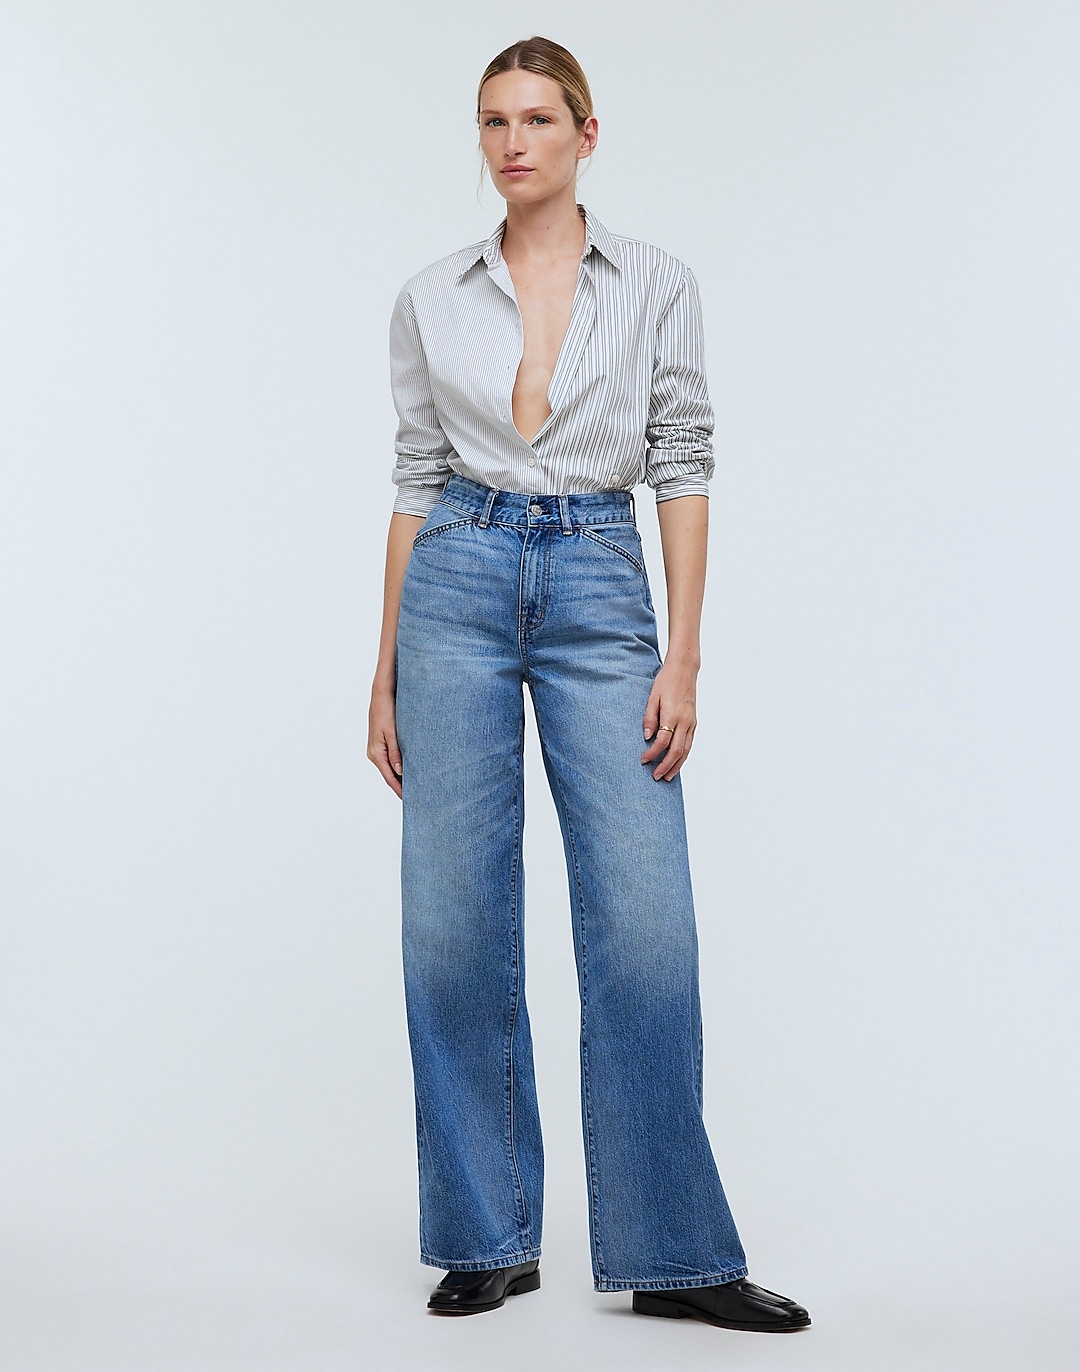 With-a-Twist Shirt in Signature Poplin | Madewell